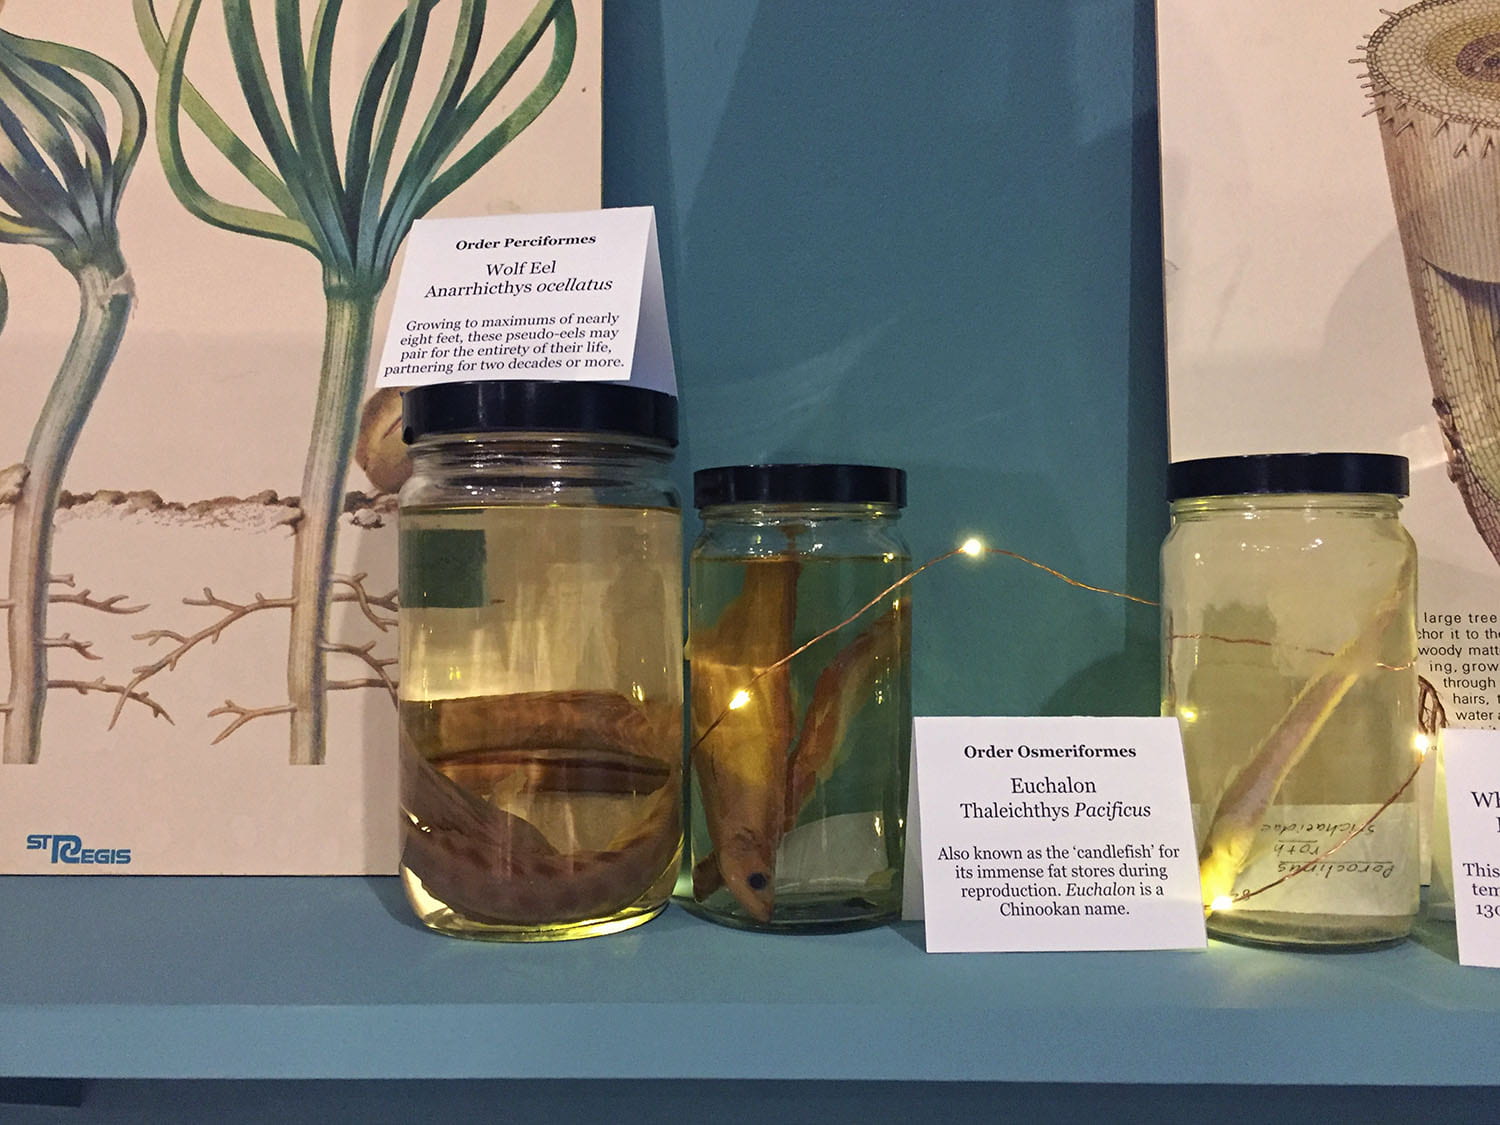 Jars containing specimens in water, labeled: Wolf Eel, and Echalon